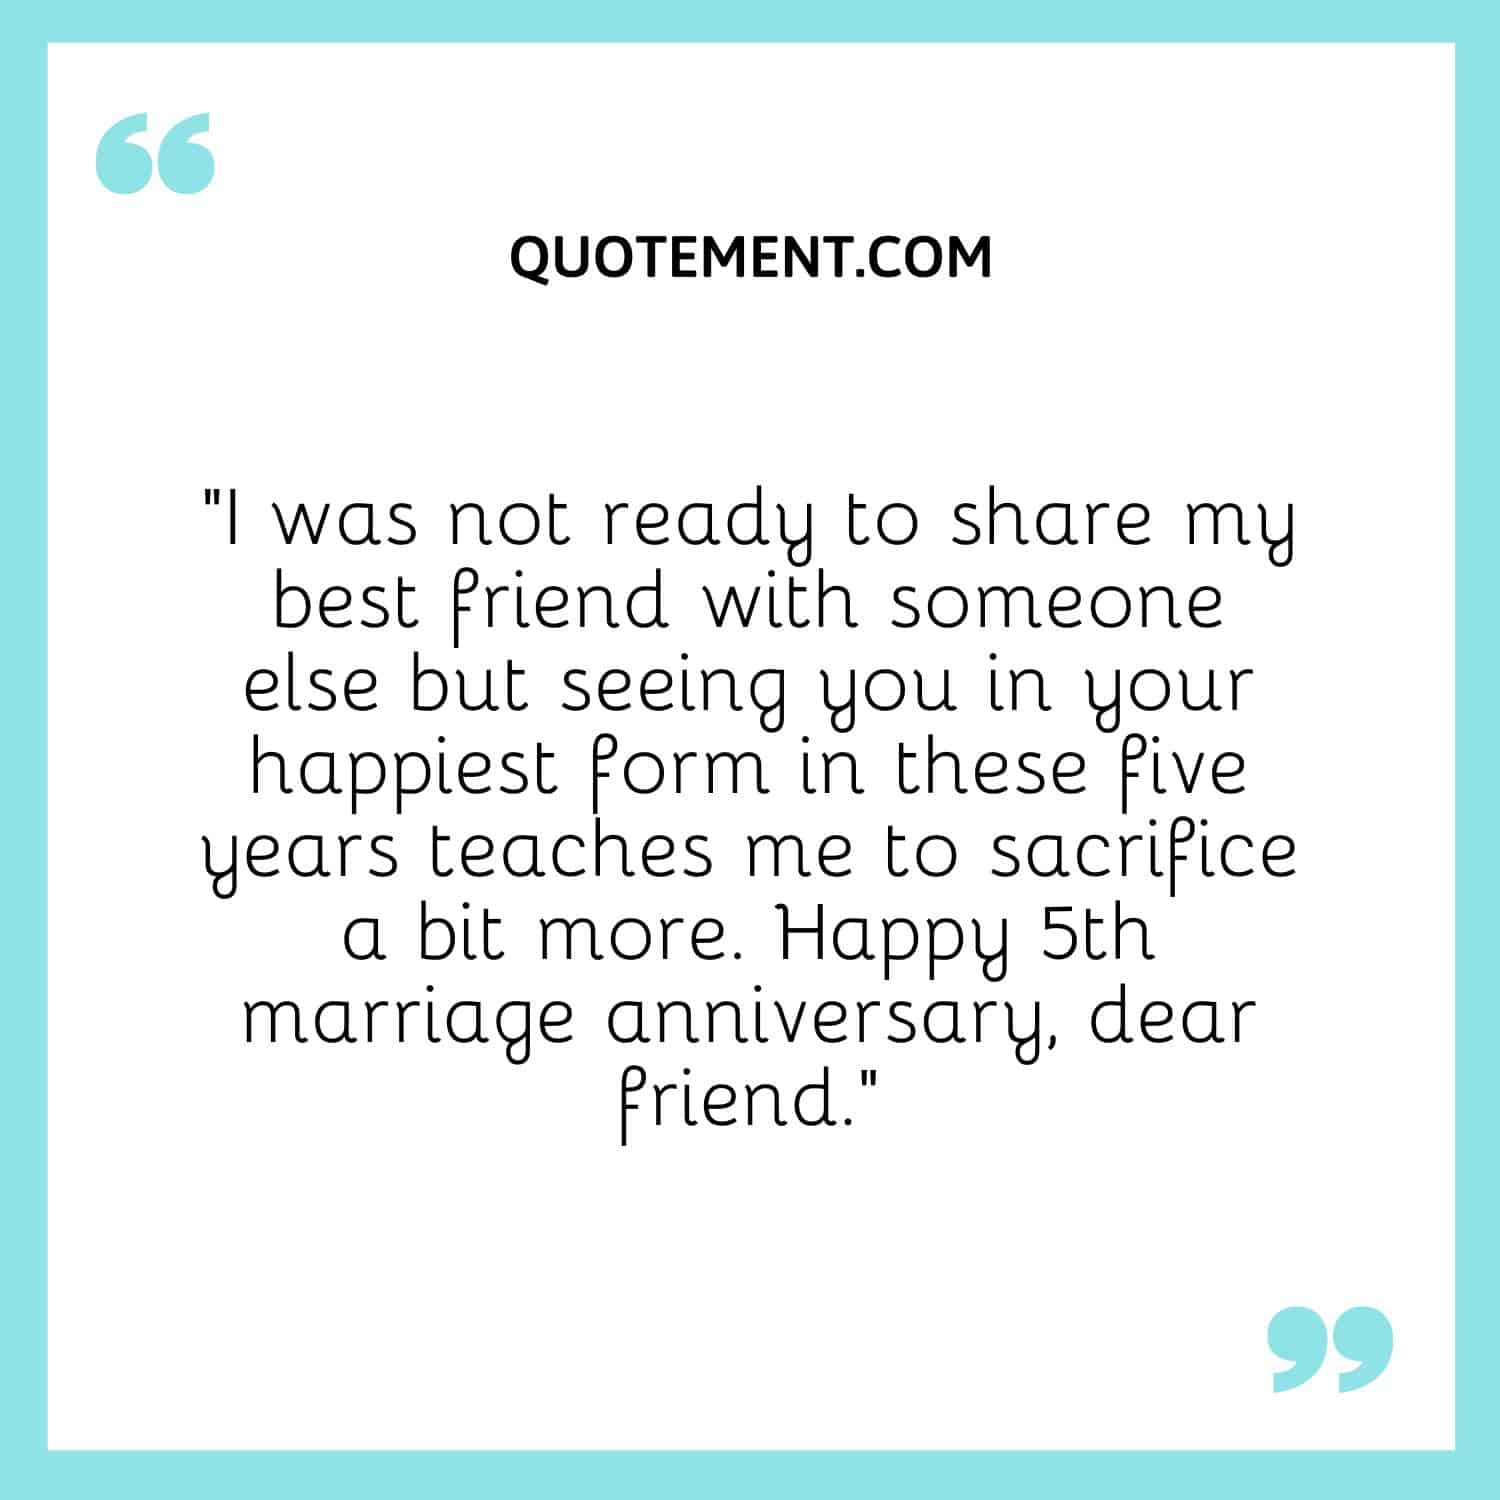 “I was not ready to share my best friend with someone else but seeing you in your happiest form in these five years teaches me to sacrifice a bit more.